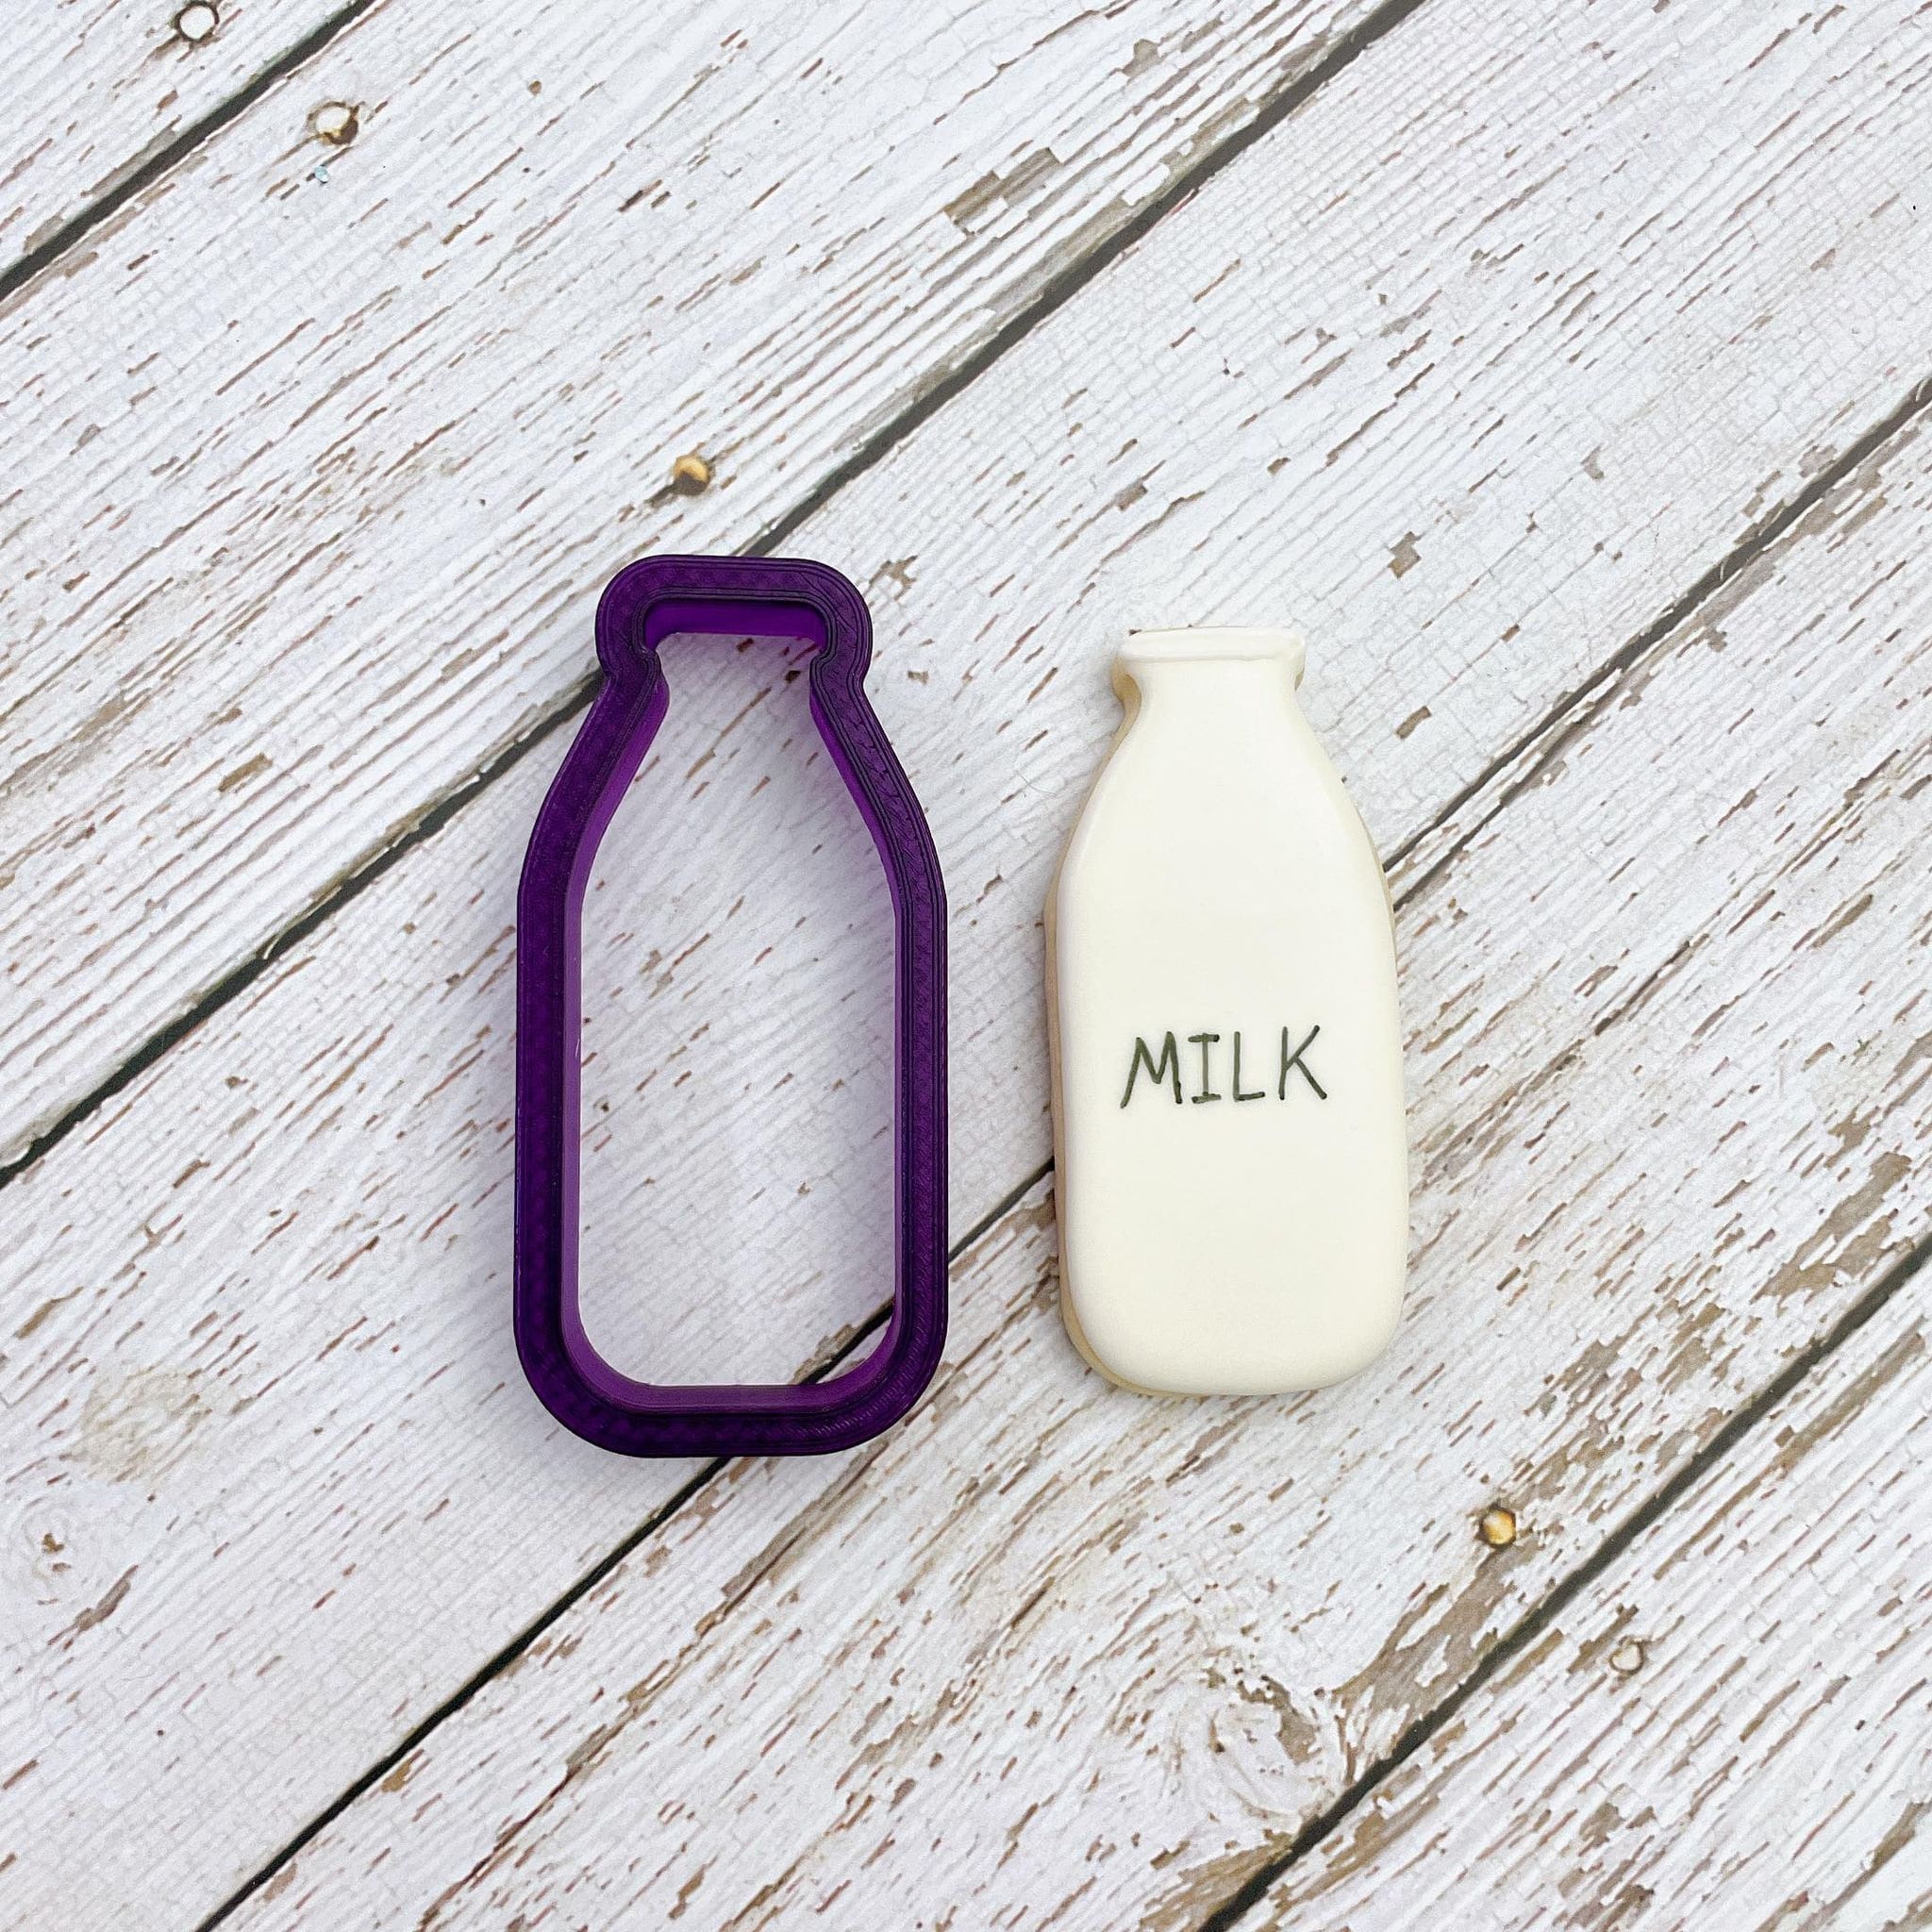 Kitchentoolz 32oz Square Glass Milk Bottle with White Metal Airtight Lids - Vintage Reusable Milk Jugs - Dairy Drinking Containers for Milk